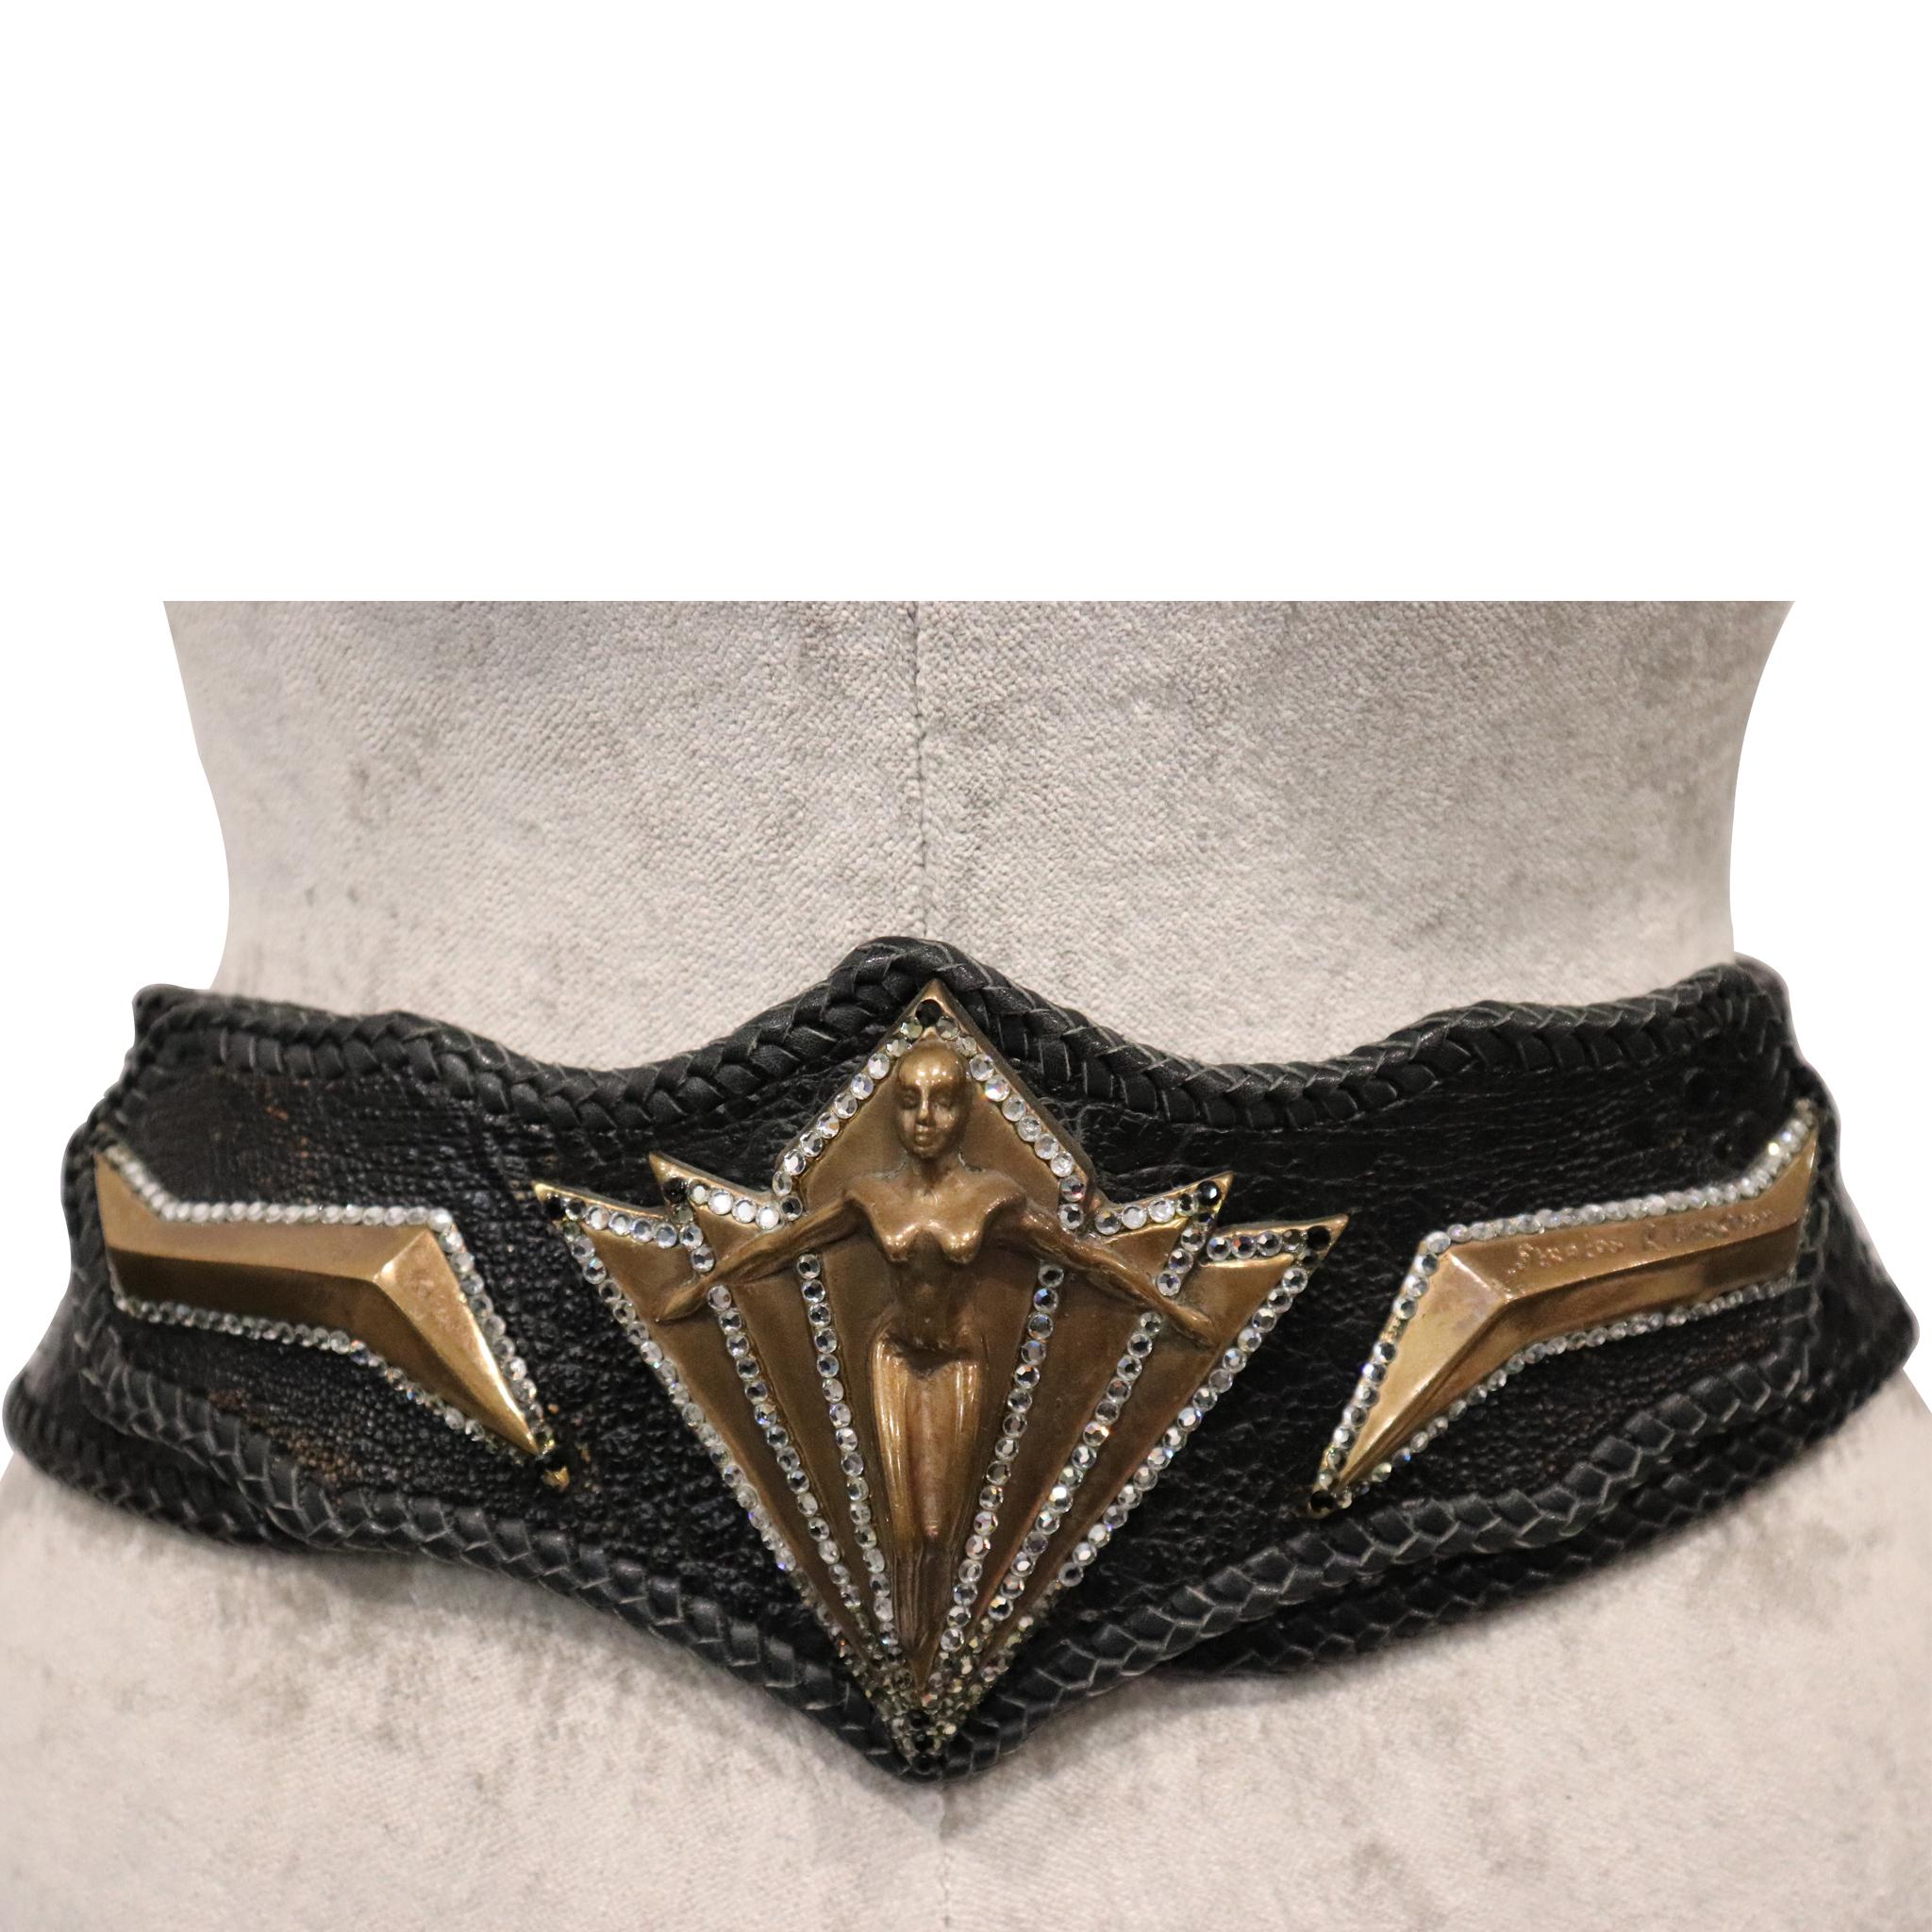 Artist Stratos R. Christoph Bronze Woman Leather Belt W/ Rhinestone Trim. VERY RARE  vintage belt from 1990s in excellent condition 

Measurements: 

Longest length - 33 inches
Shortest length - 30.8 inches 
Height - 4.3 inches 